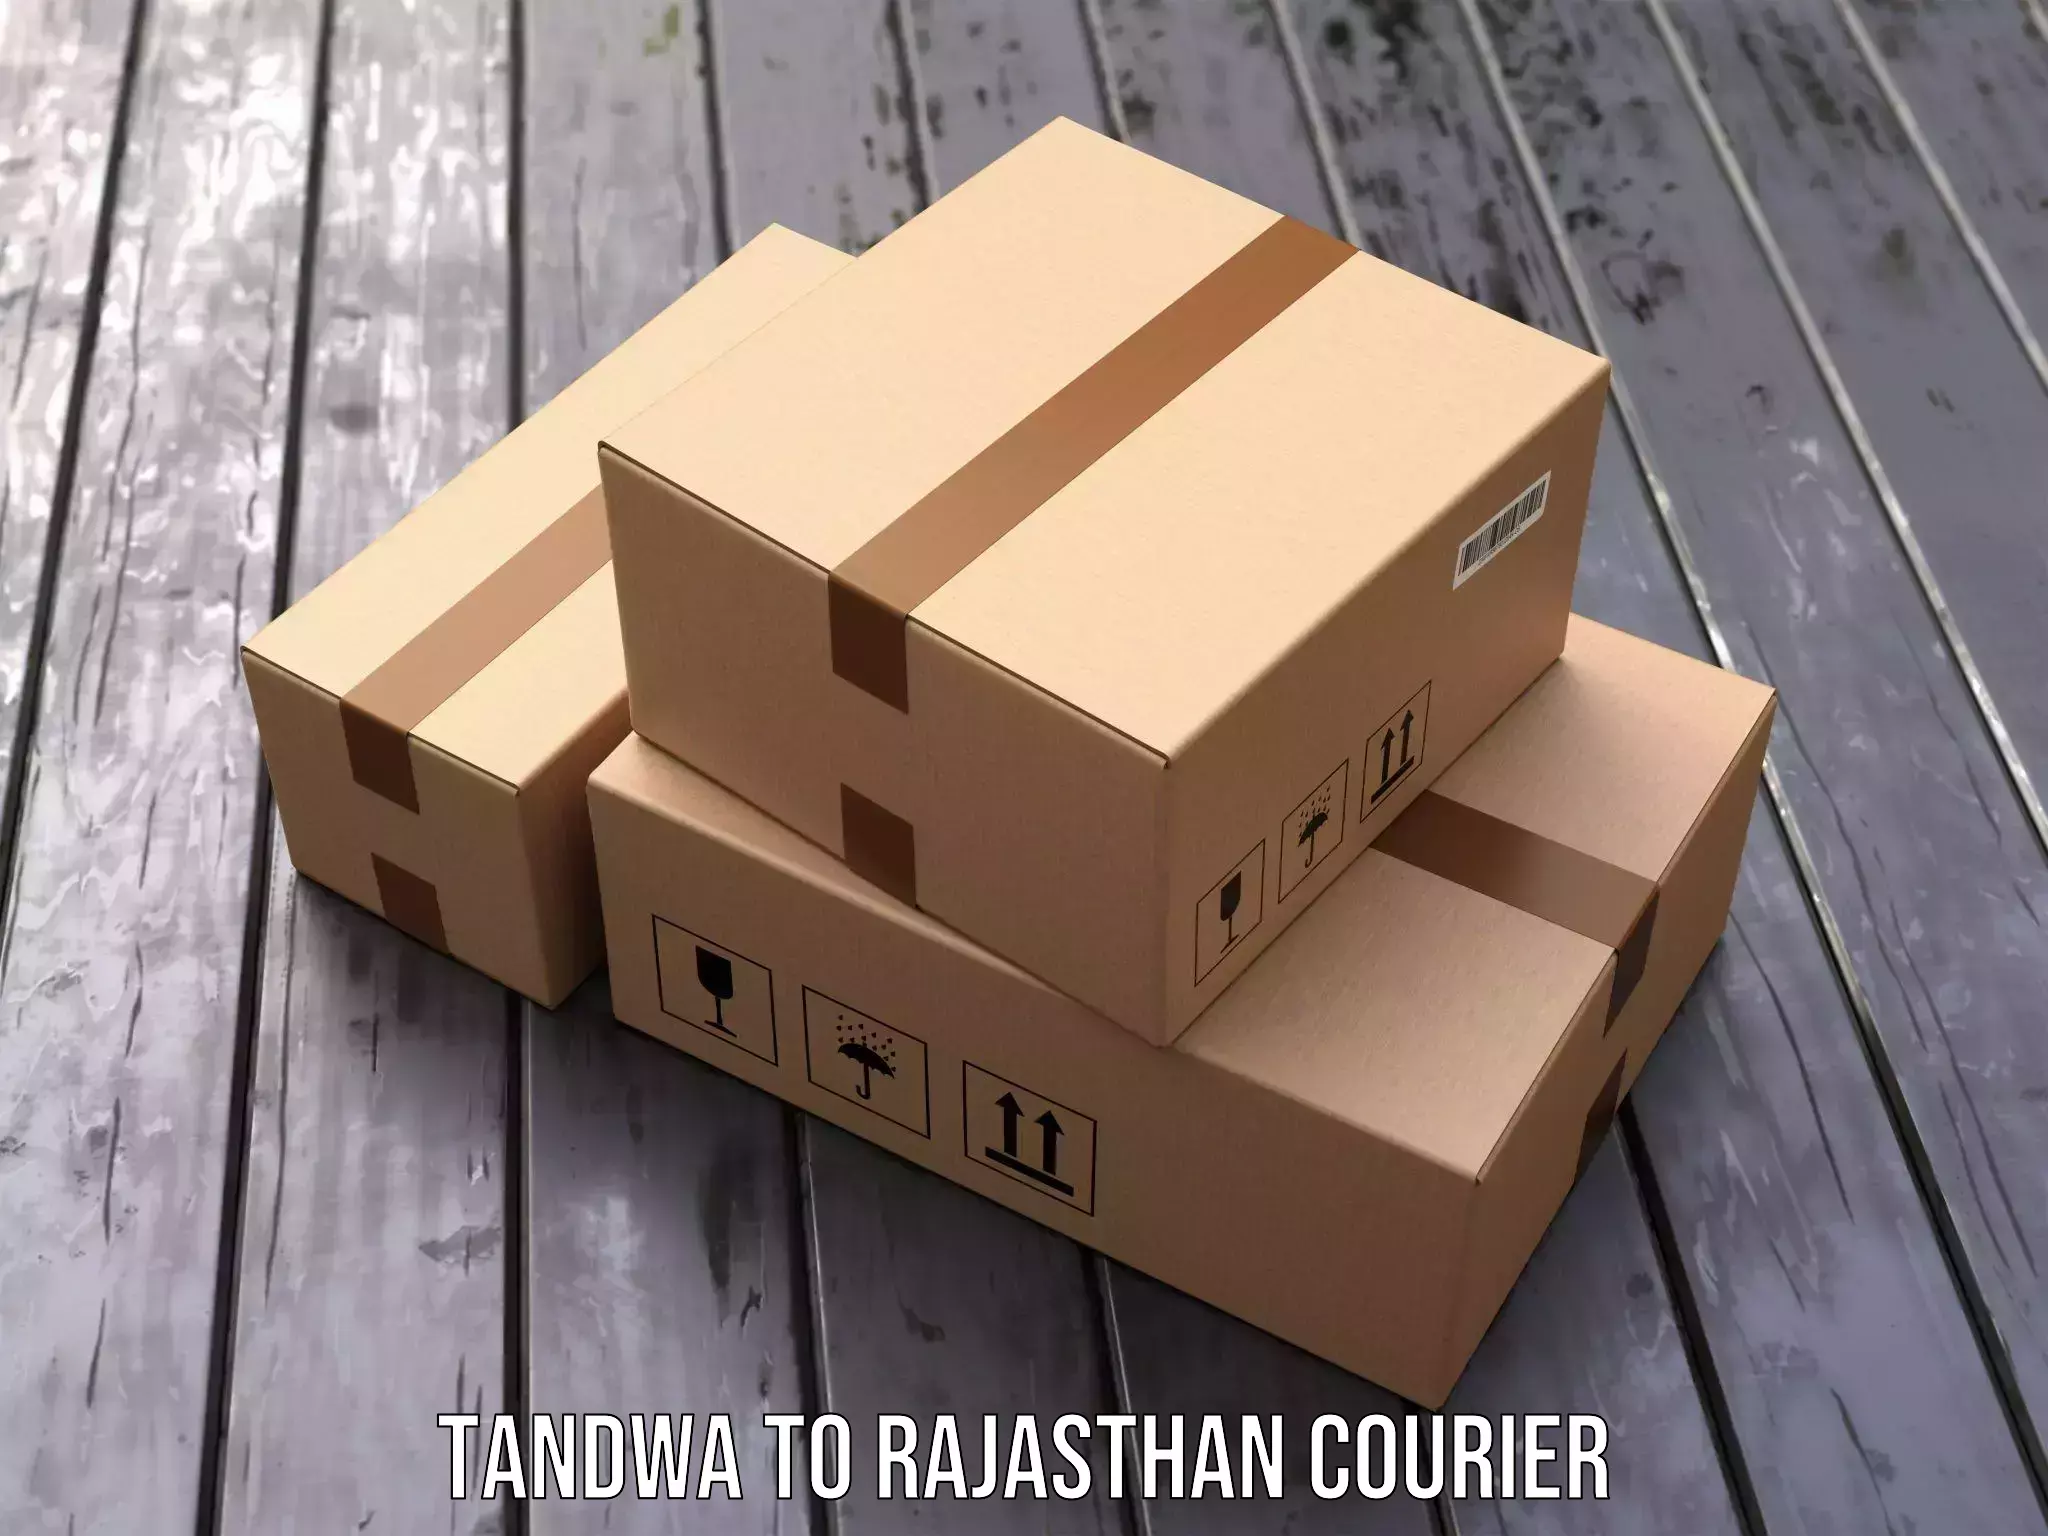 Multi-national courier services Tandwa to Fatehpur Sikar